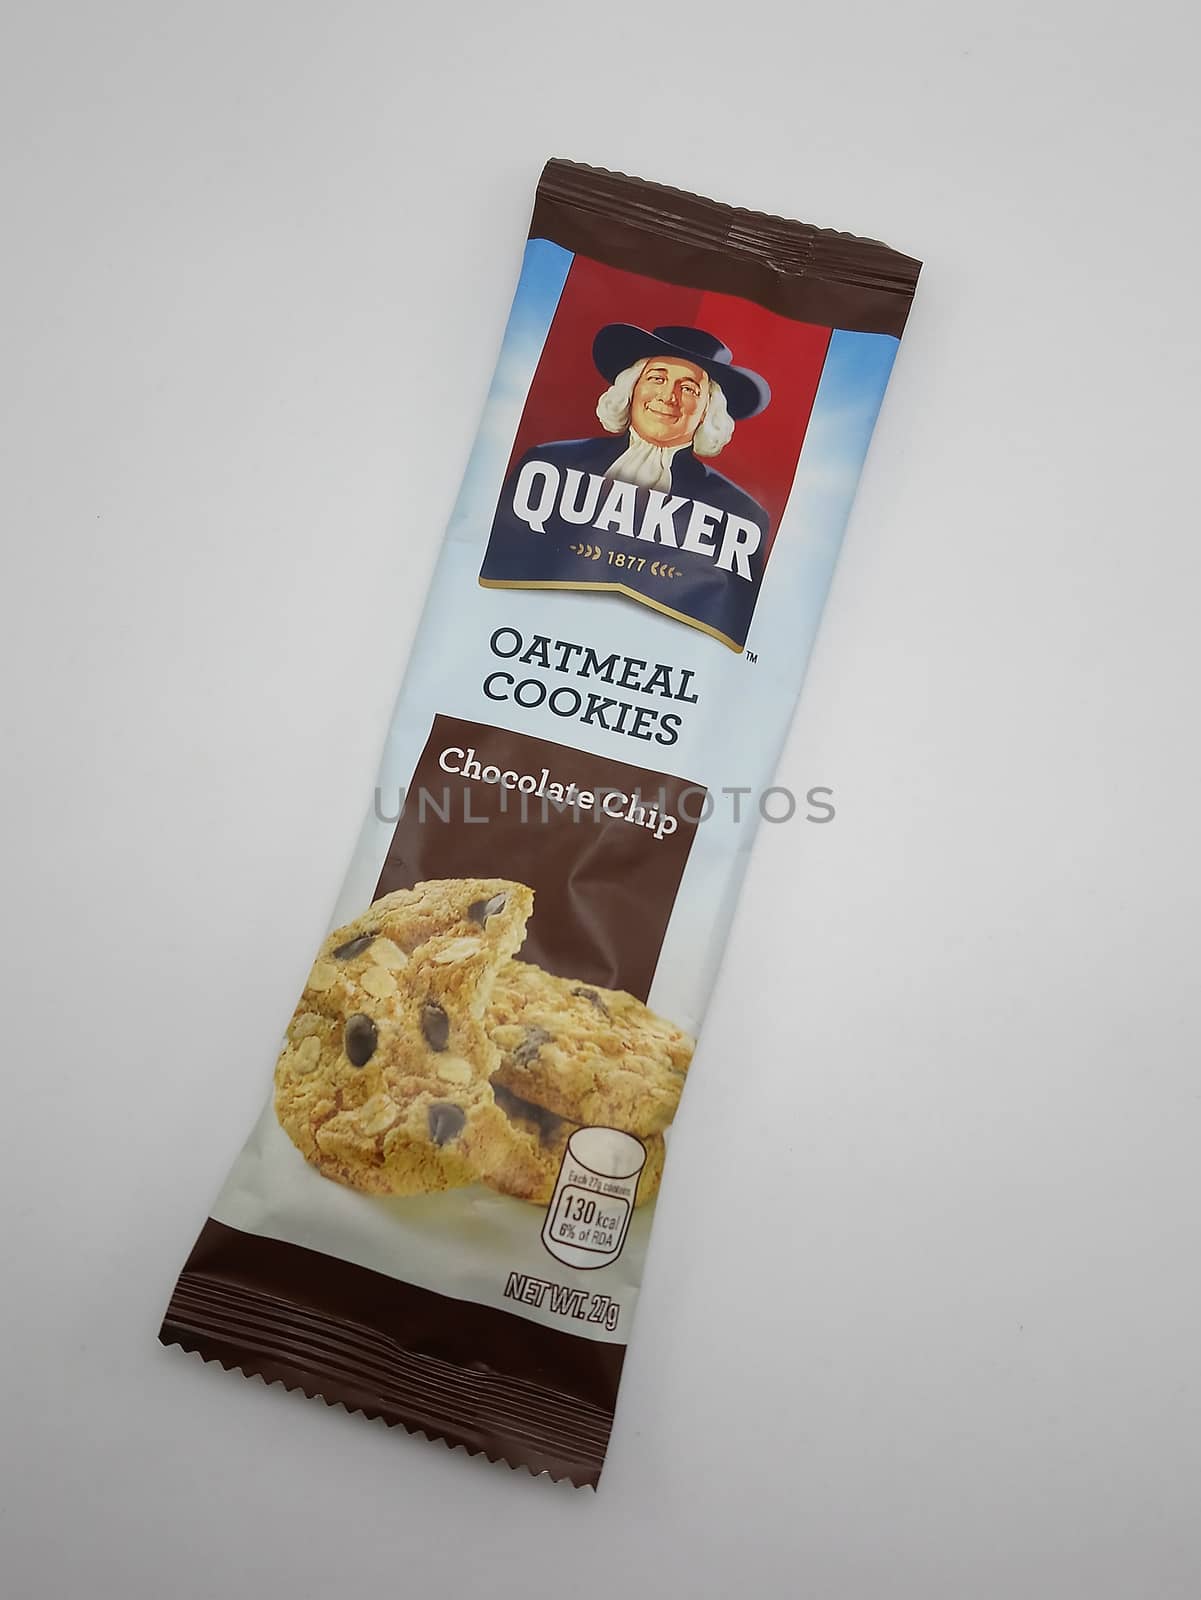 Quaker oatmeal cookies chocolate chip in Manila, Philippines by imwaltersy